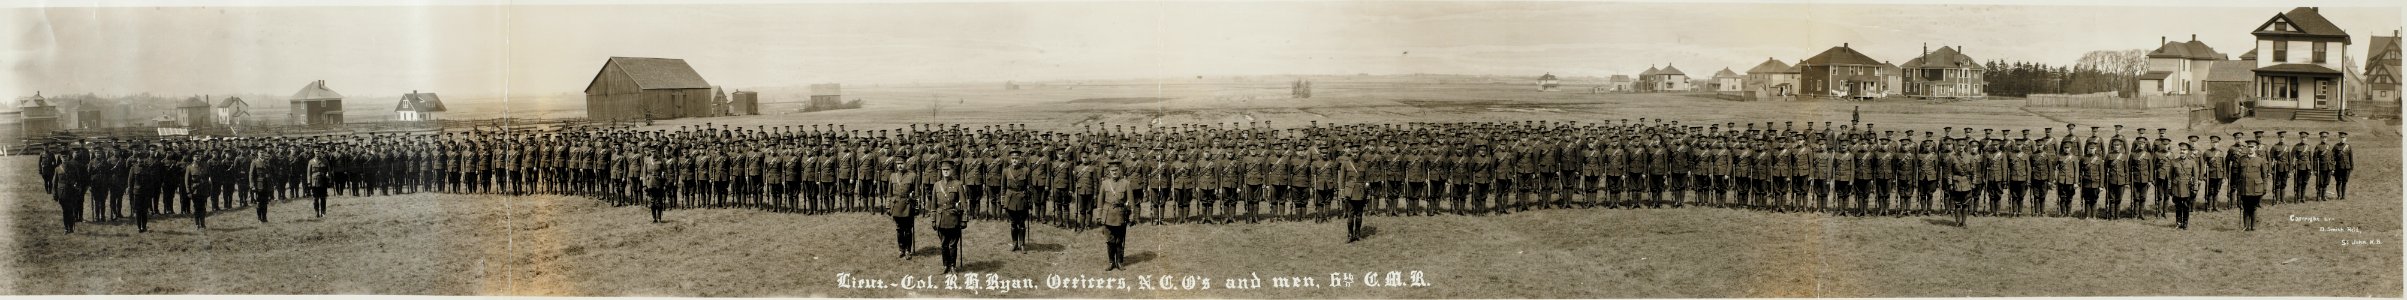 Lt. Col. R.H. Ryan, officers, NCO's and men, 6th CMR (HS85-10-30269) photo